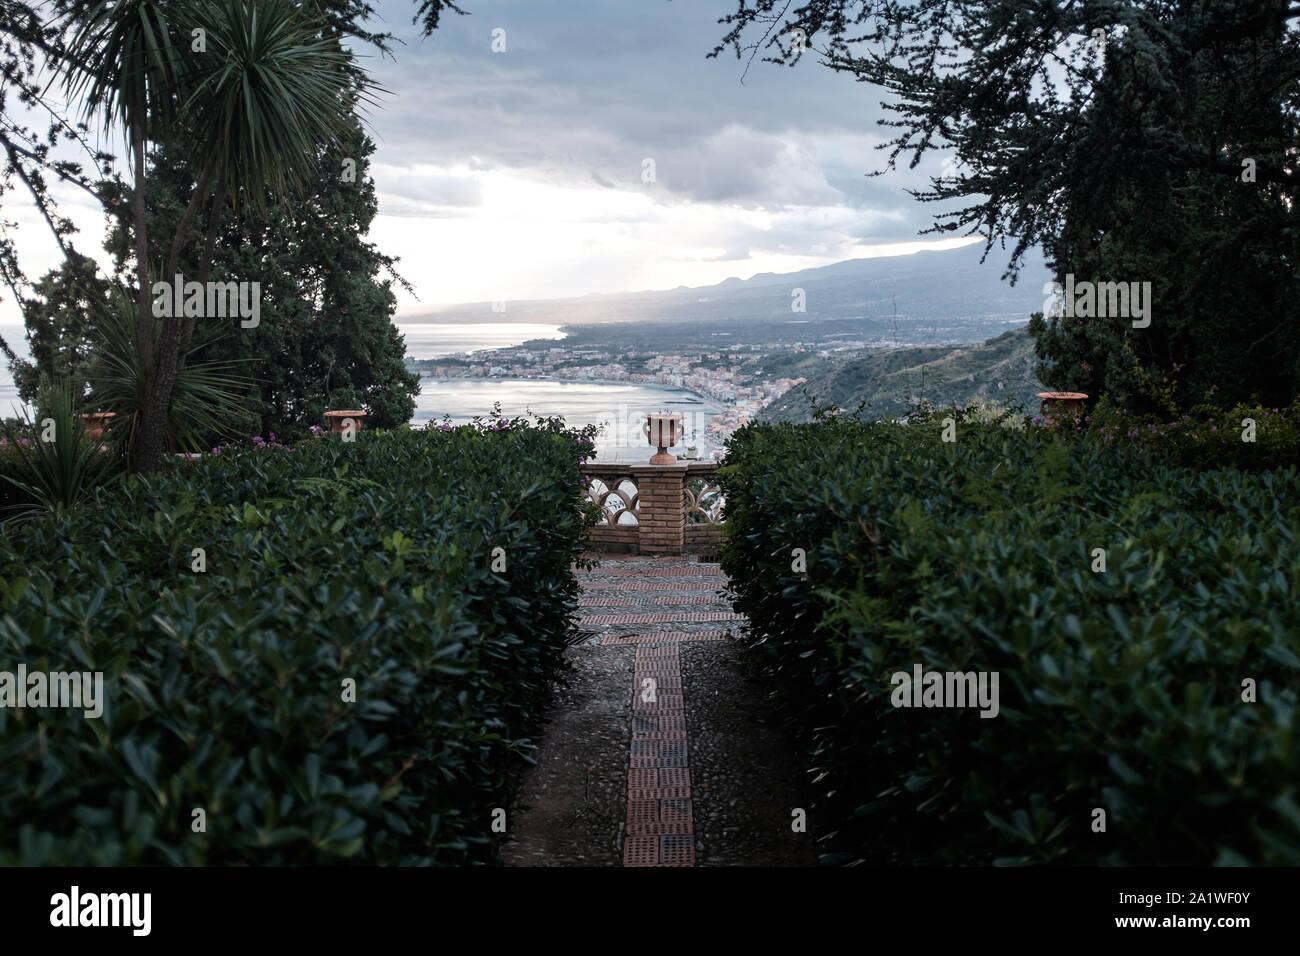 View of Taromina, Sicily, from a terrace during sunset Stock Photo